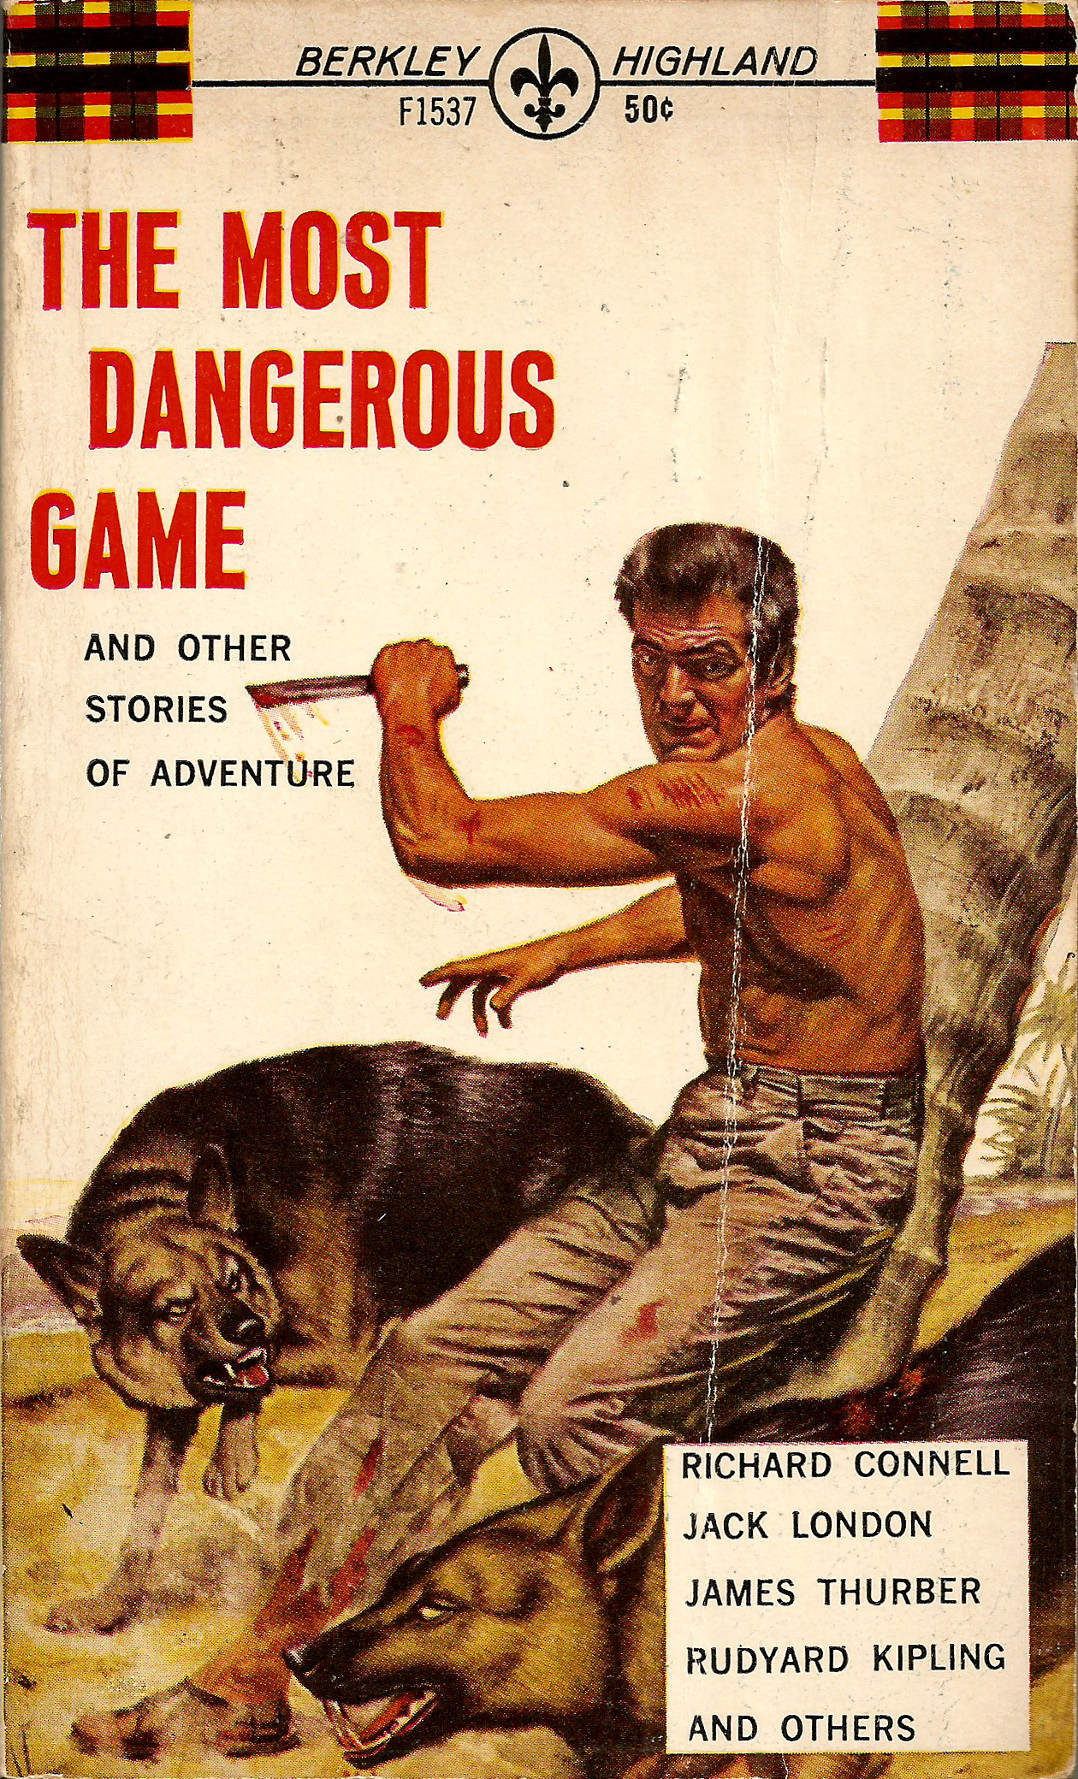 The Most Dangerous Game and other stories of adventure (Berkely Highland, 1968).